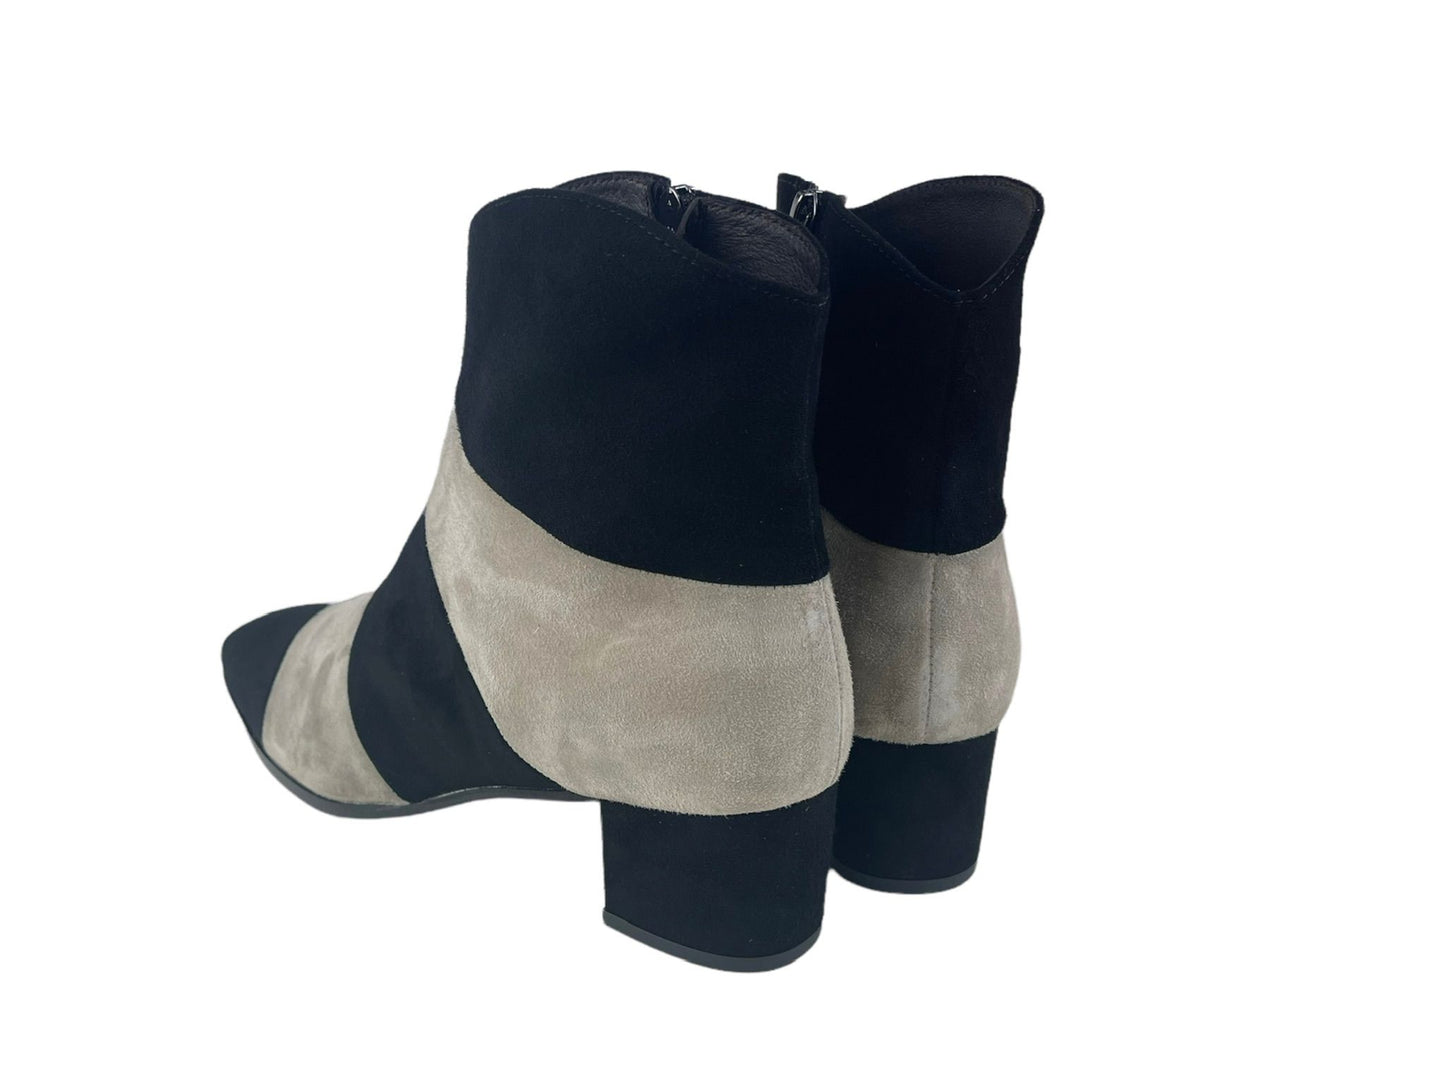 Plumers Menorca | Handcrafted black suede leather ankle boot gray stripes Mahón